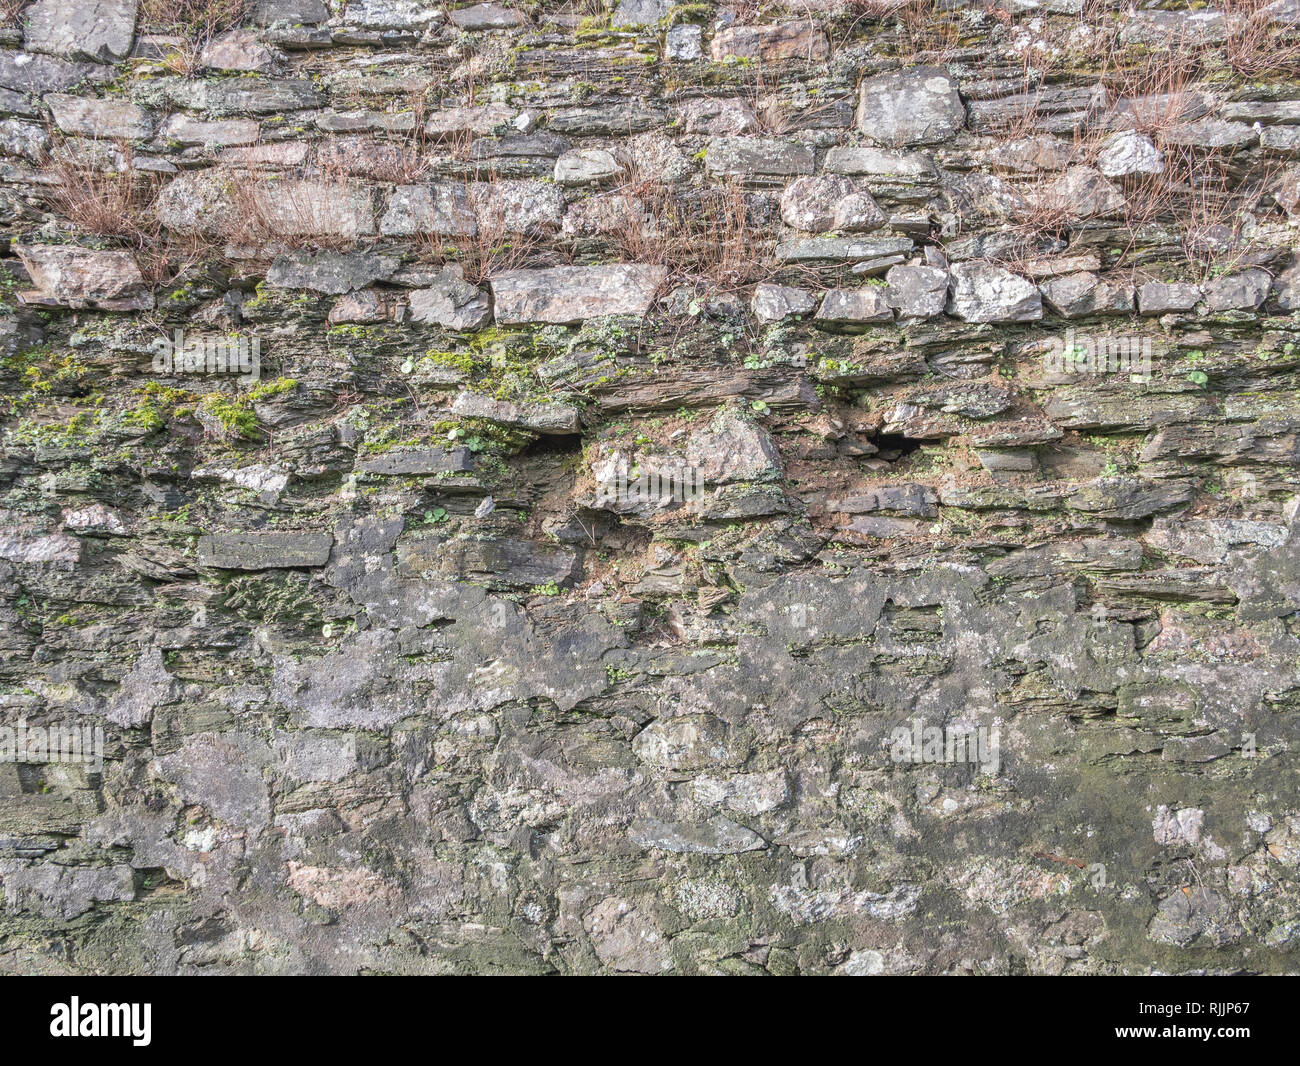 Old stone wall in a poor state. Stock Photo